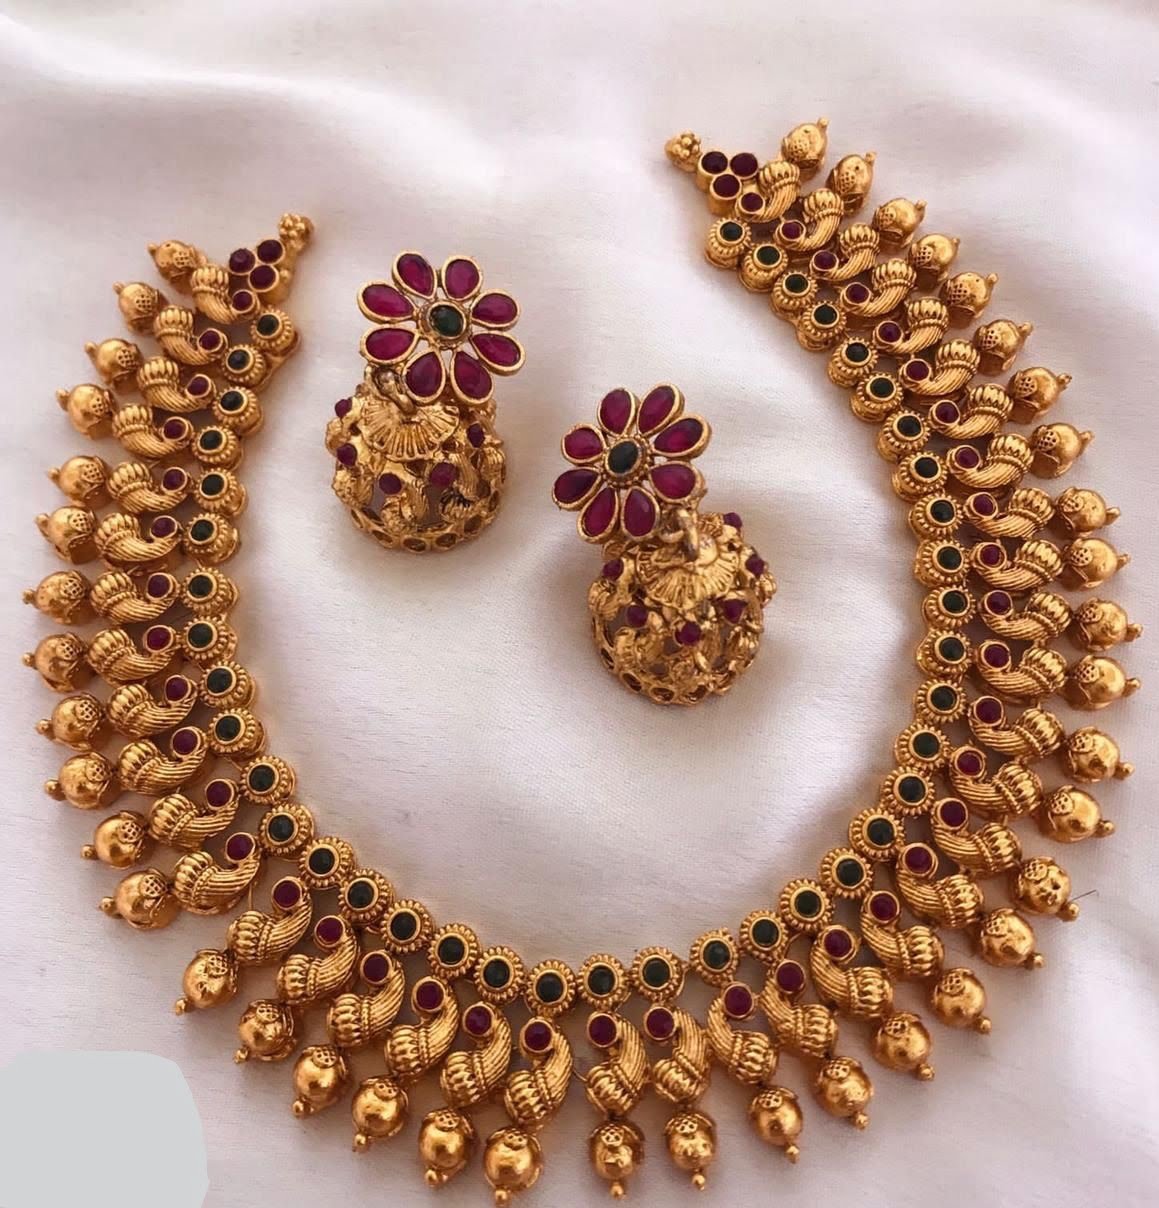 Deora Jewellery Gold Matte Finish Big Necklace with Small Necklace  Jewellery Set with Earrings Price in India - Buy Deora Jewellery Gold Matte  Finish Big Necklace with Small Necklace Jewellery Set with